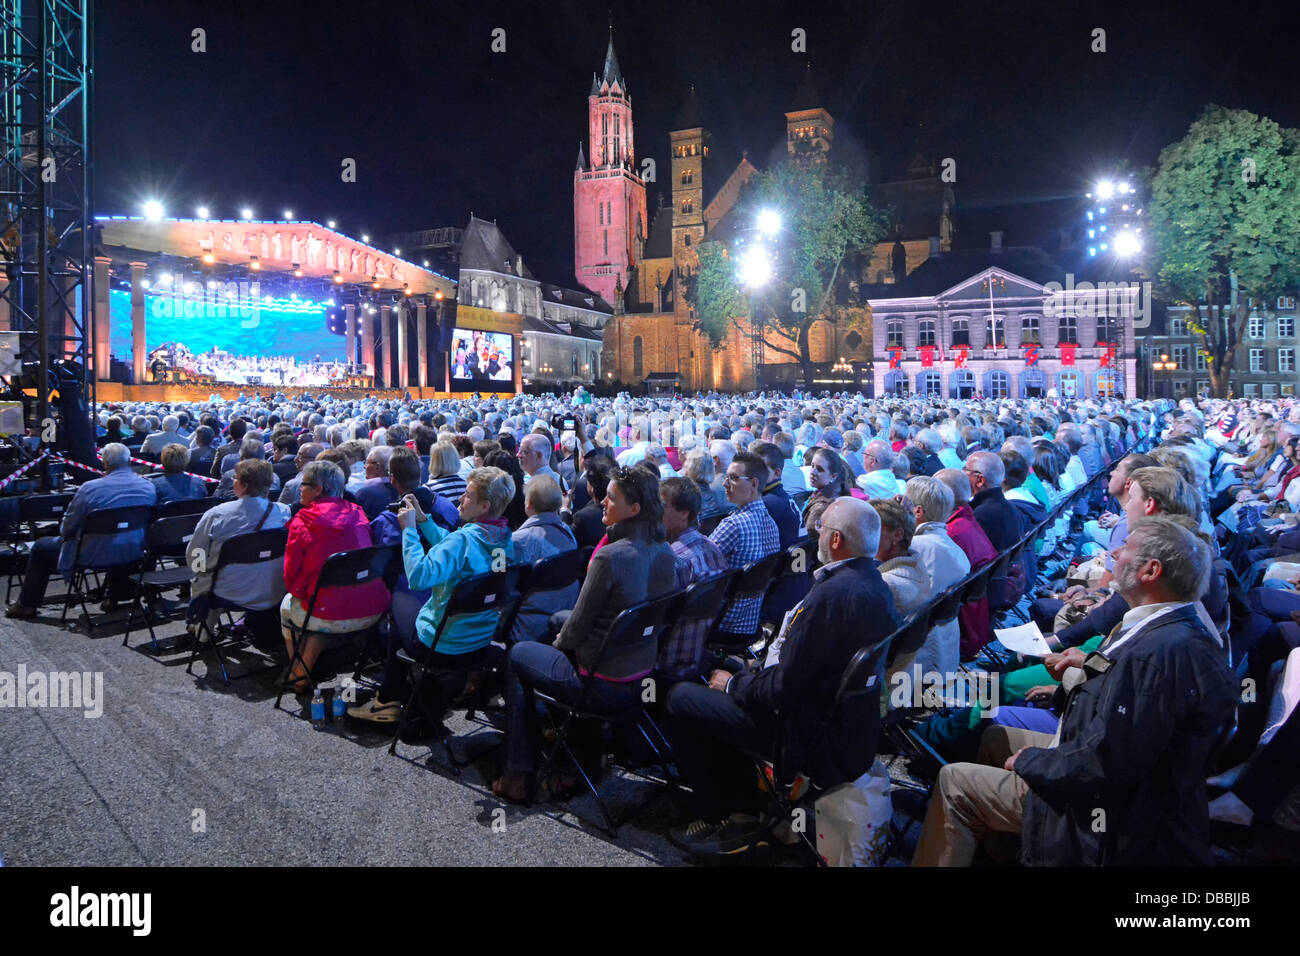 Maastricht Vrijthof Square Limburg close up paying audience watching & listening to André Rieu evening music concert event floodlit trees & buildings Stock Photo